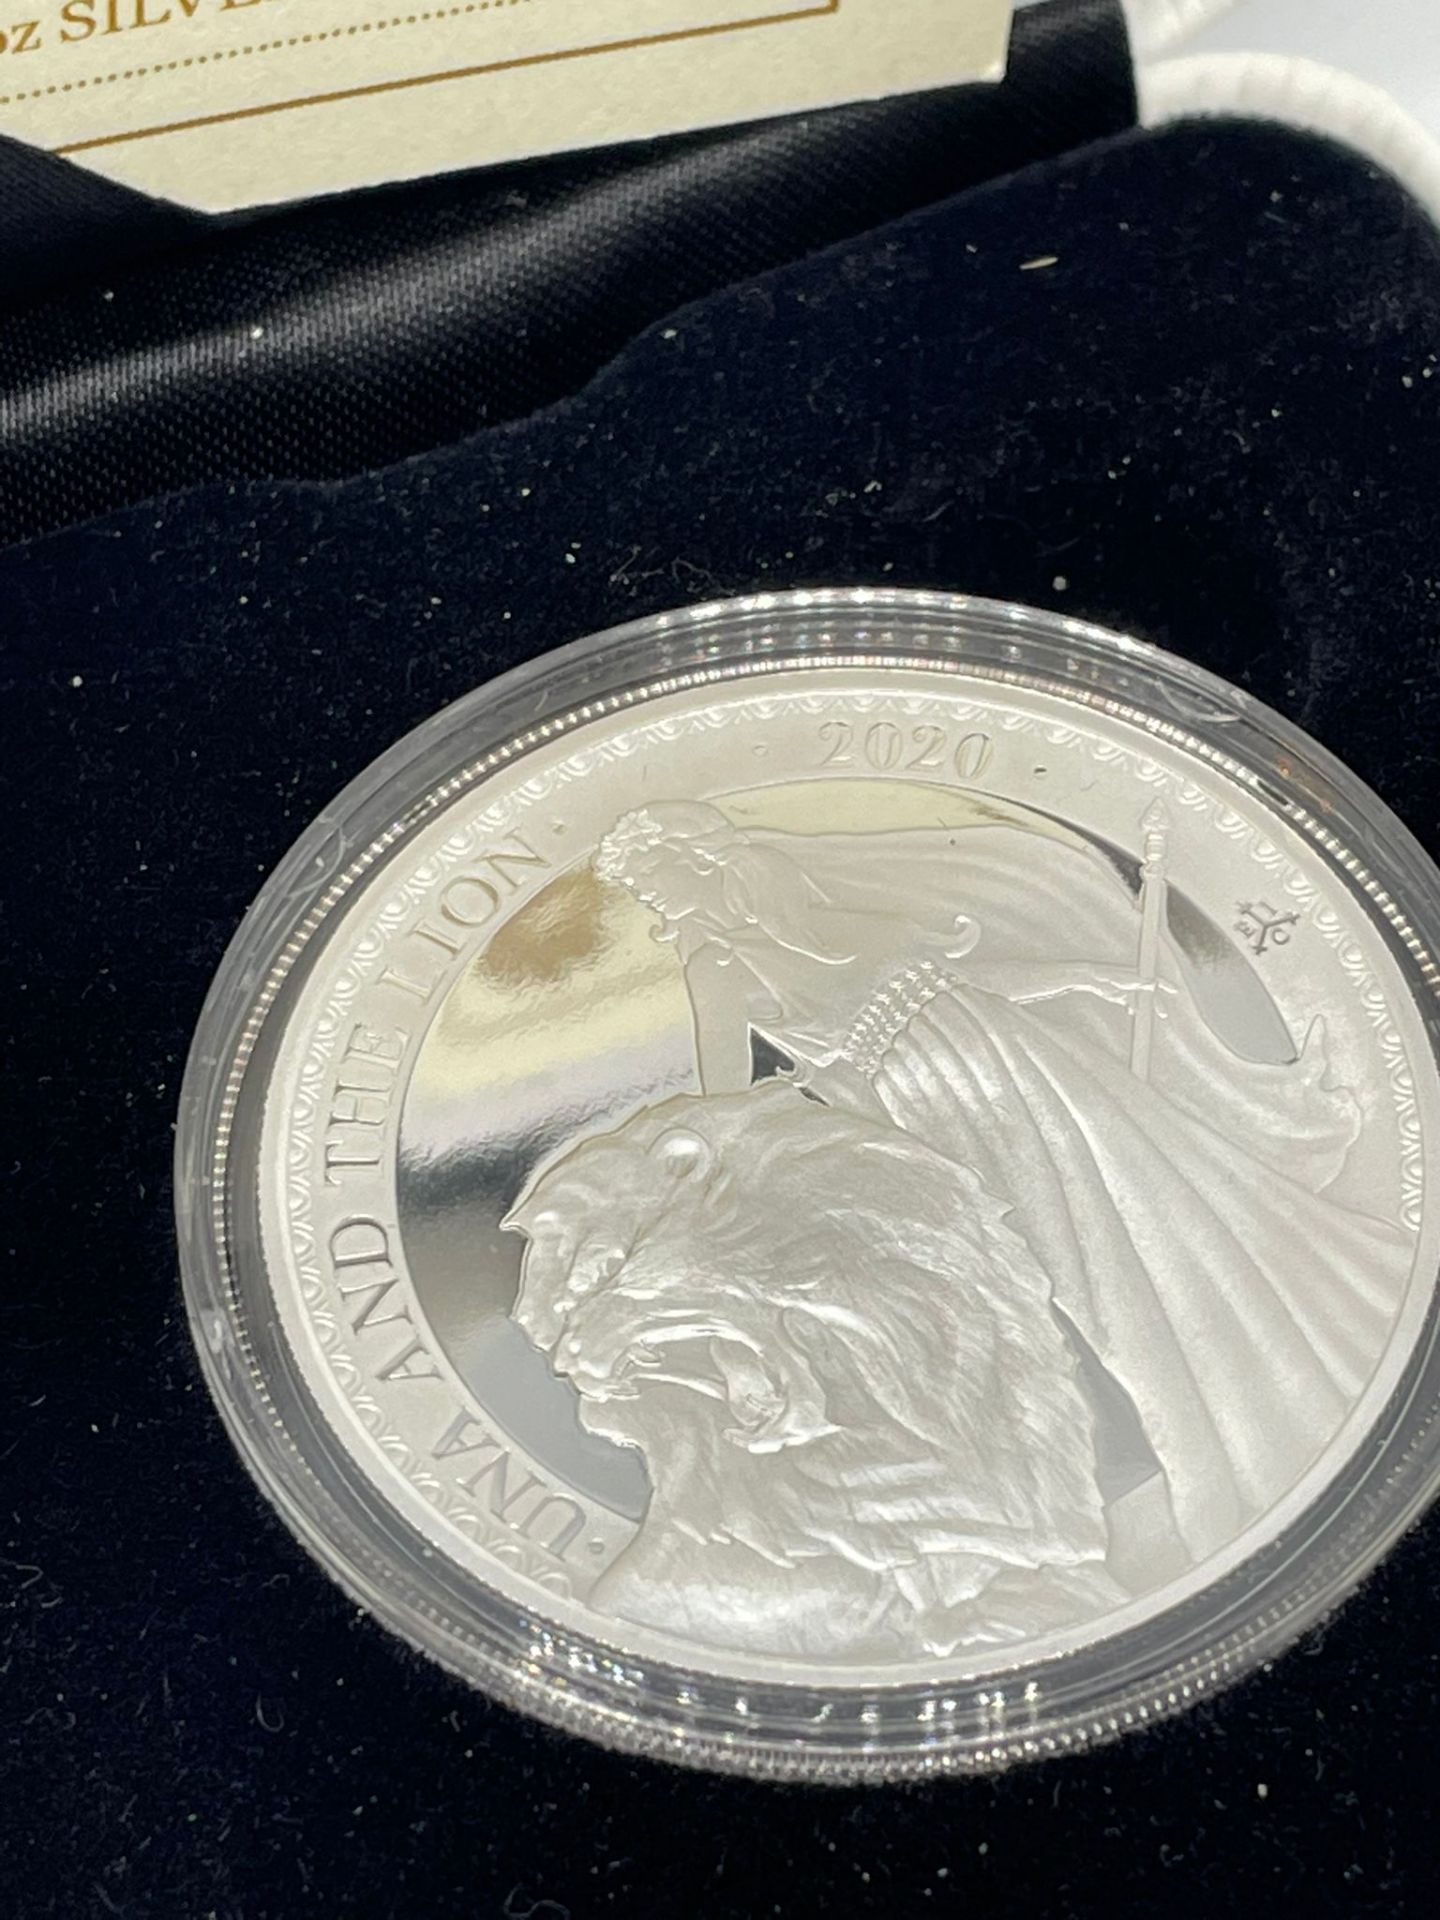 Boxed 2020 UNA and the lion 1oz silver proof coin - Image 2 of 2